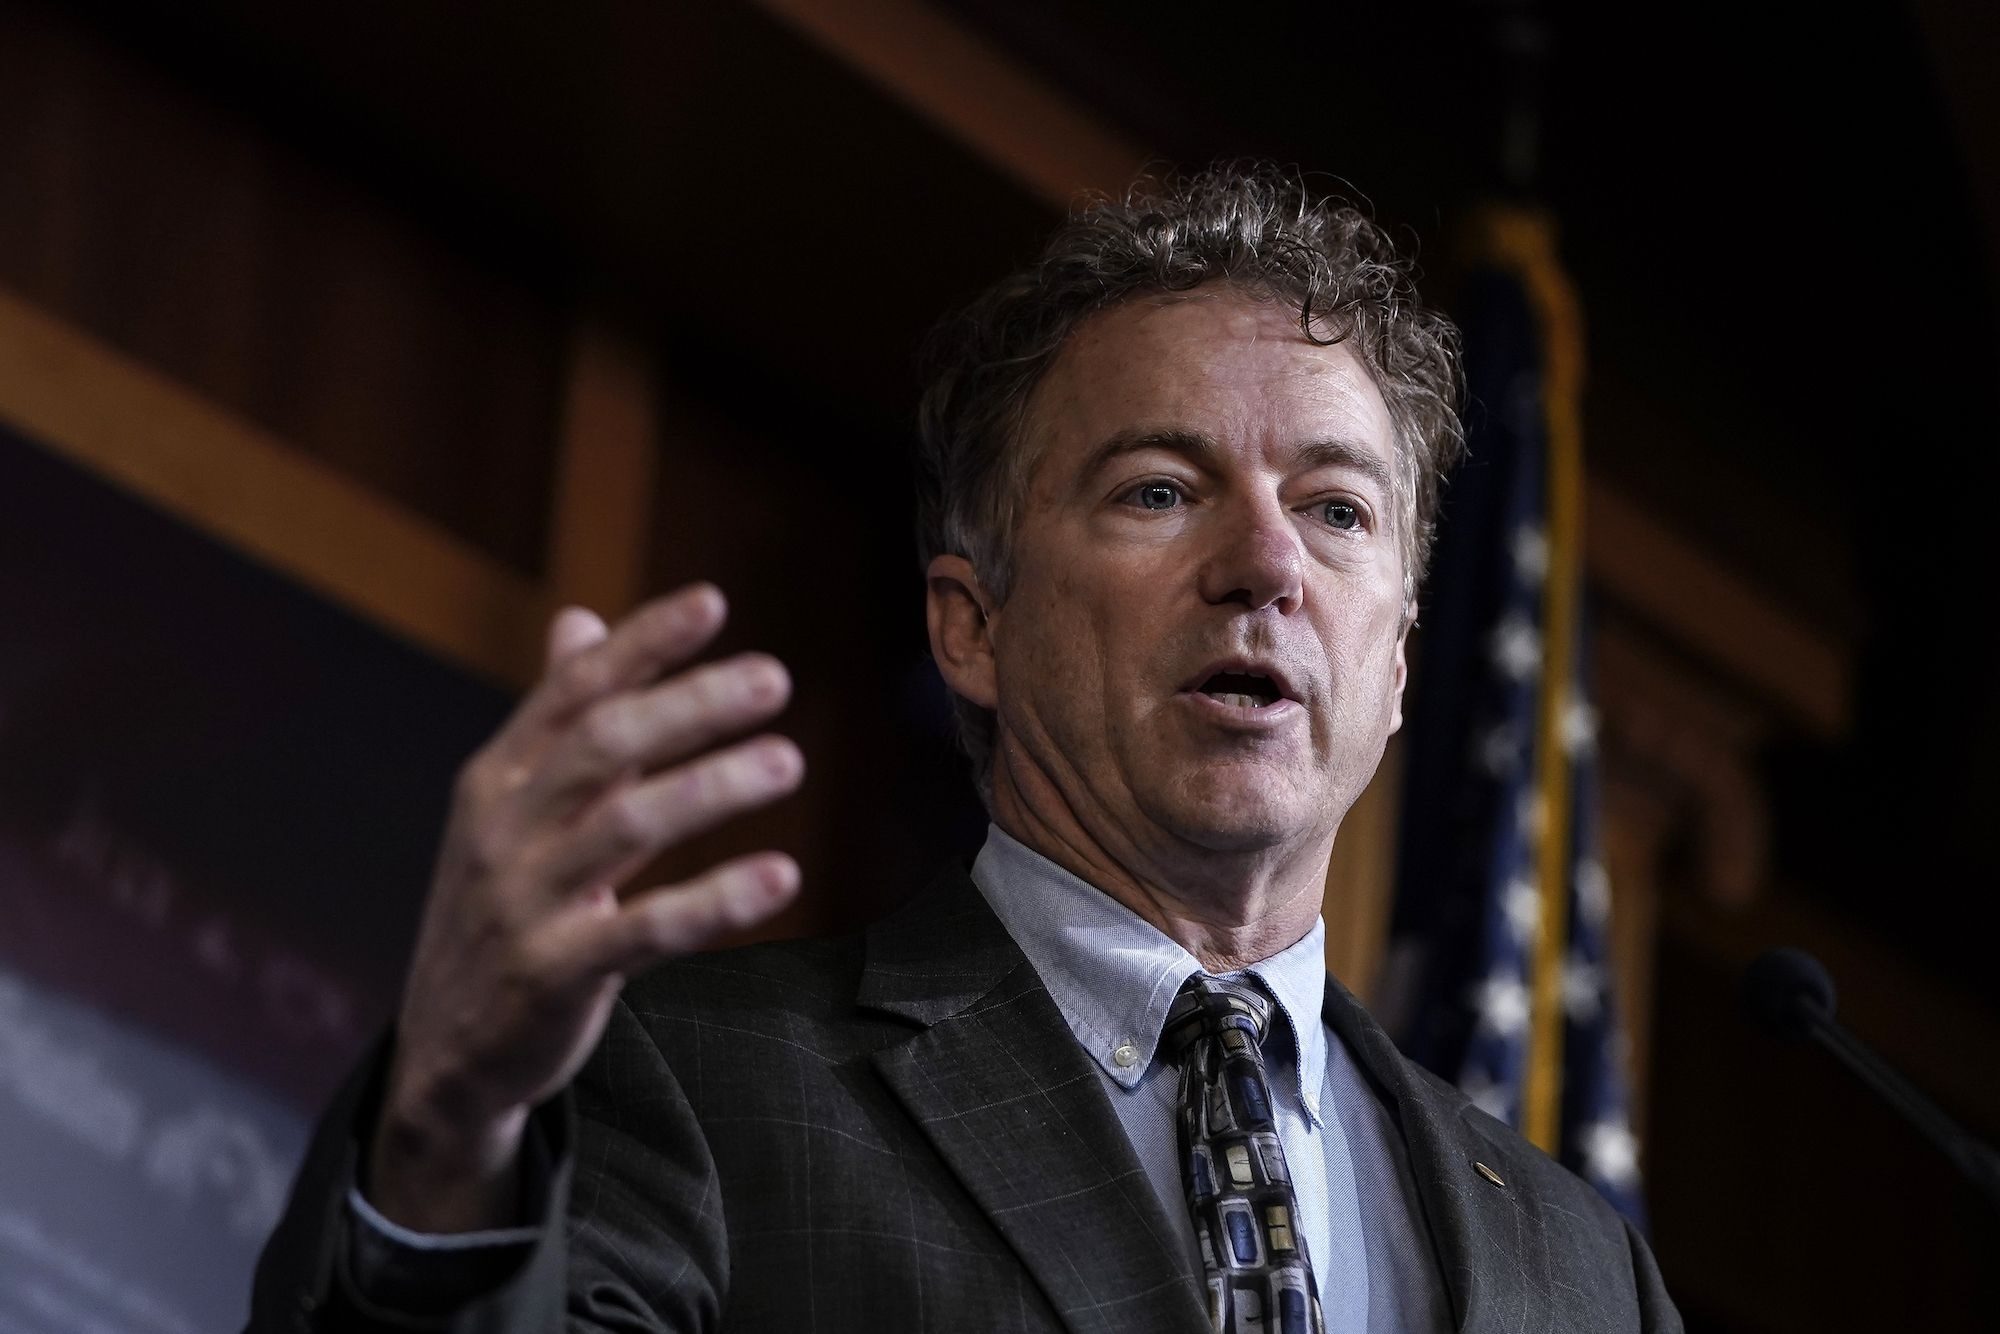 'WE'VE CRIPPLED THE ECONOMY': Rand Paul Says Lockdowns Were A ‘Big Mistake' | The Gateway Pundit | by Eric A. Blair